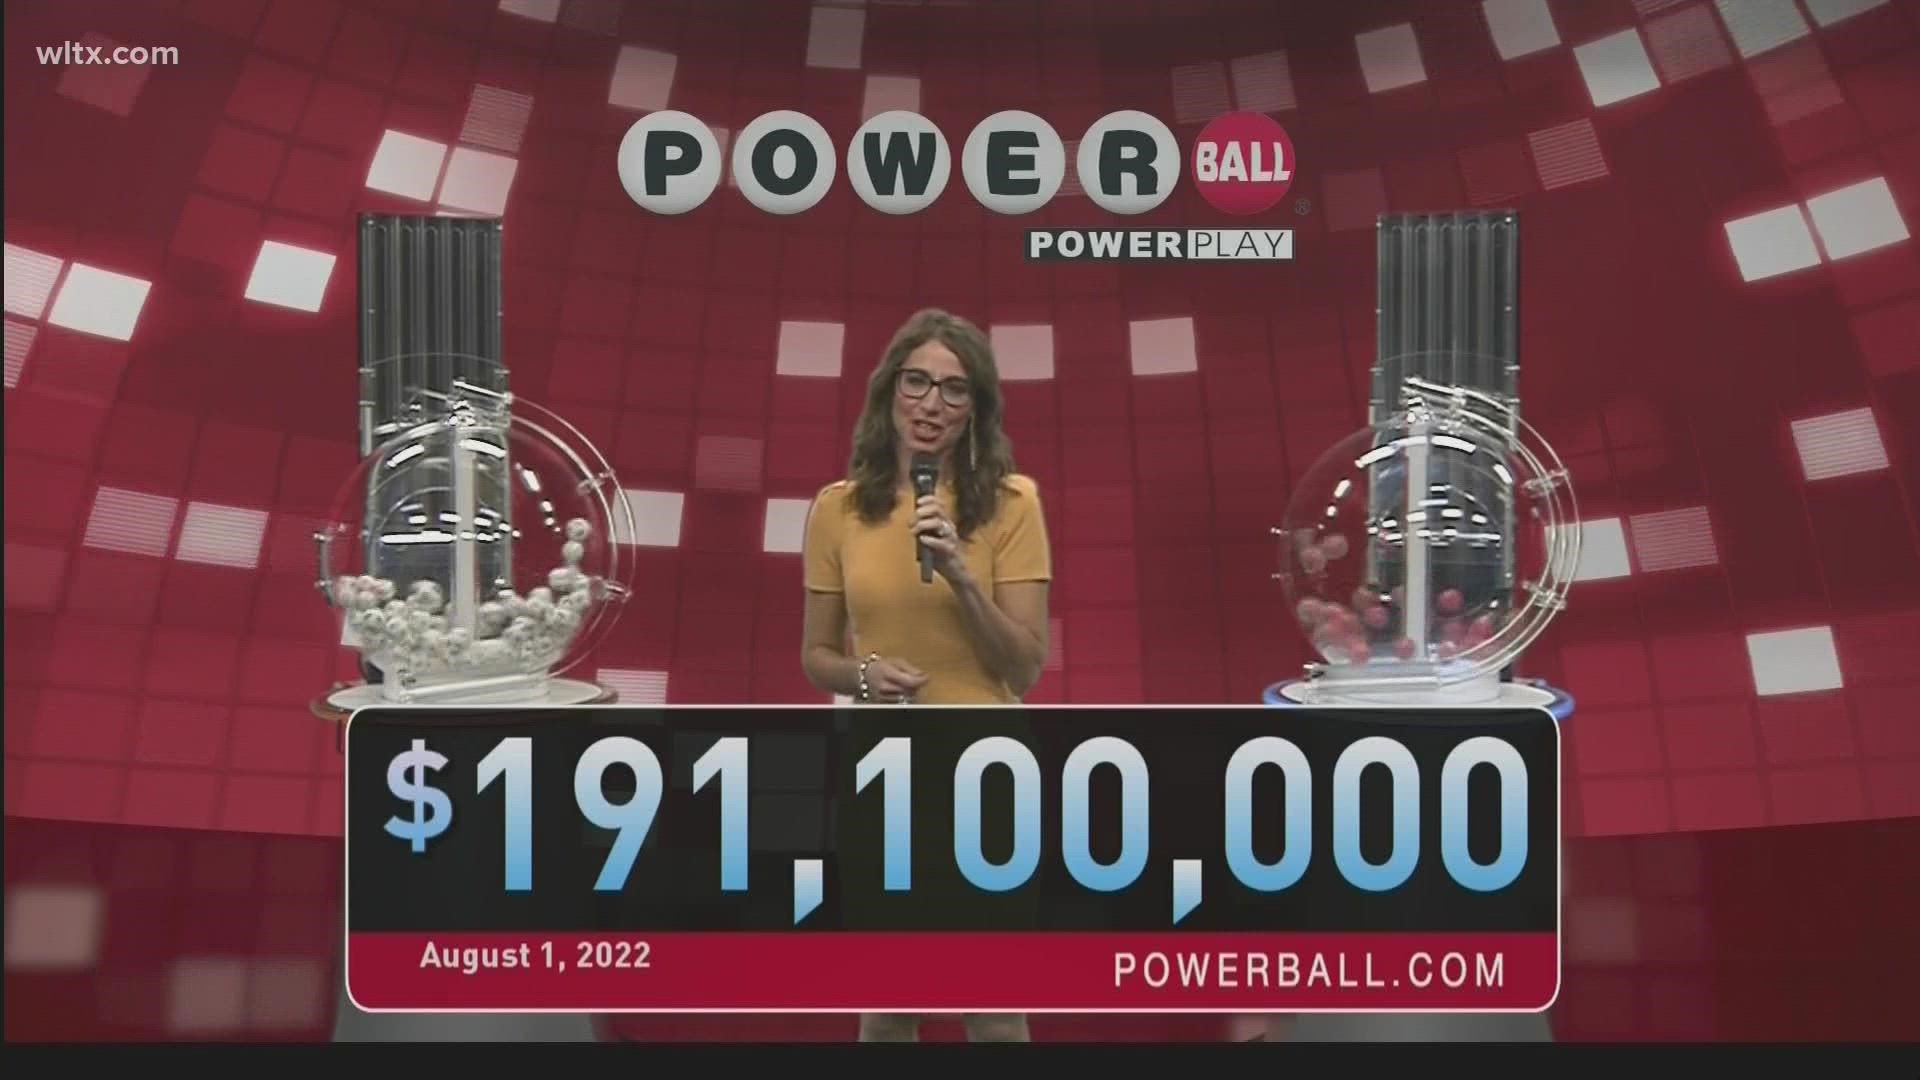 Here are the winning Powerball numbers for Monday, August 1, 2022.